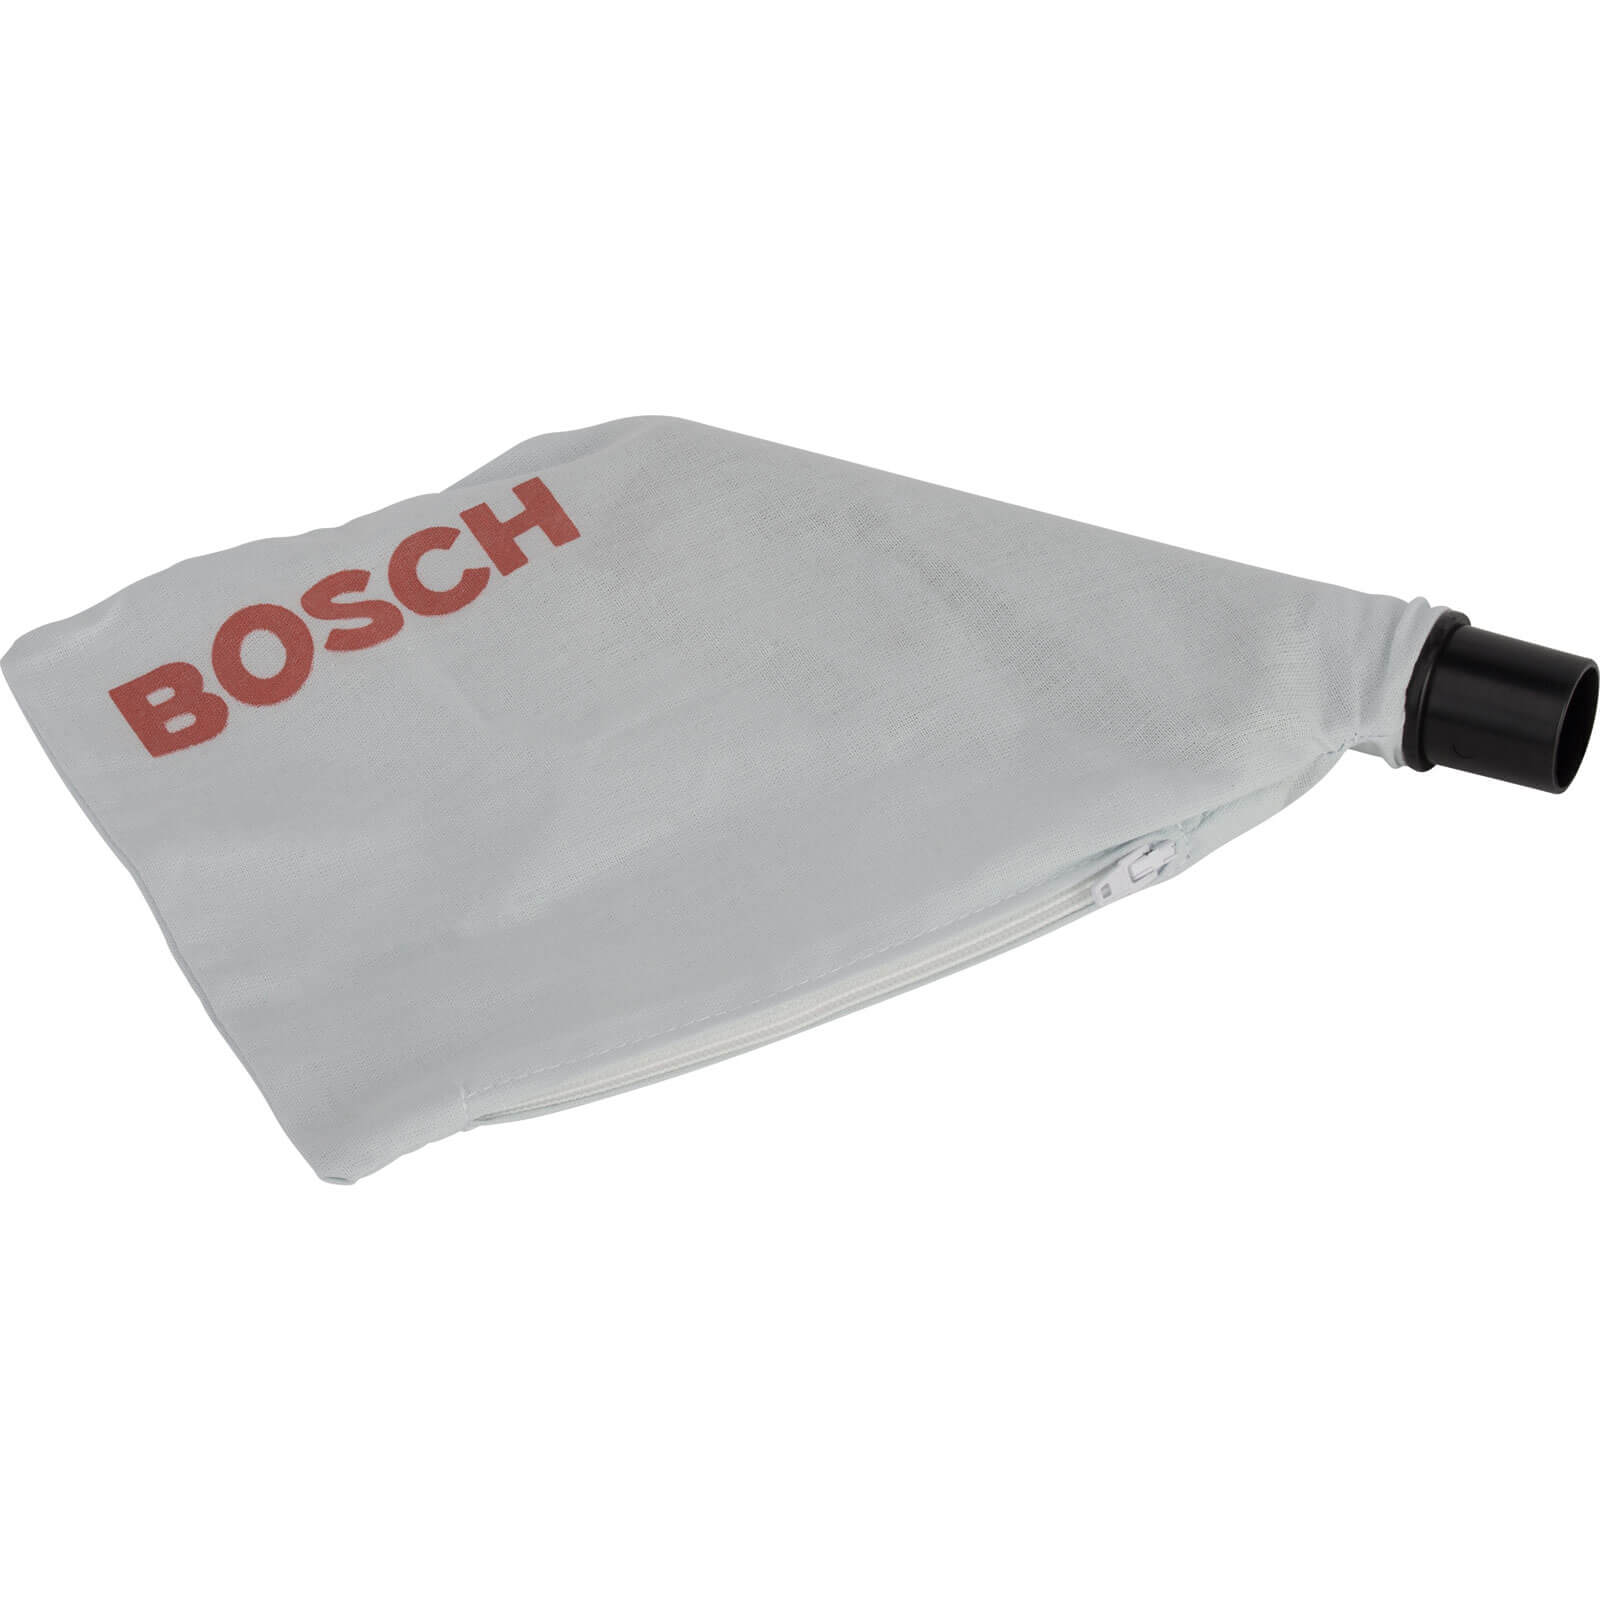 Photo of Bosch Dust Bag For Gff 22a Biscuit Jointers